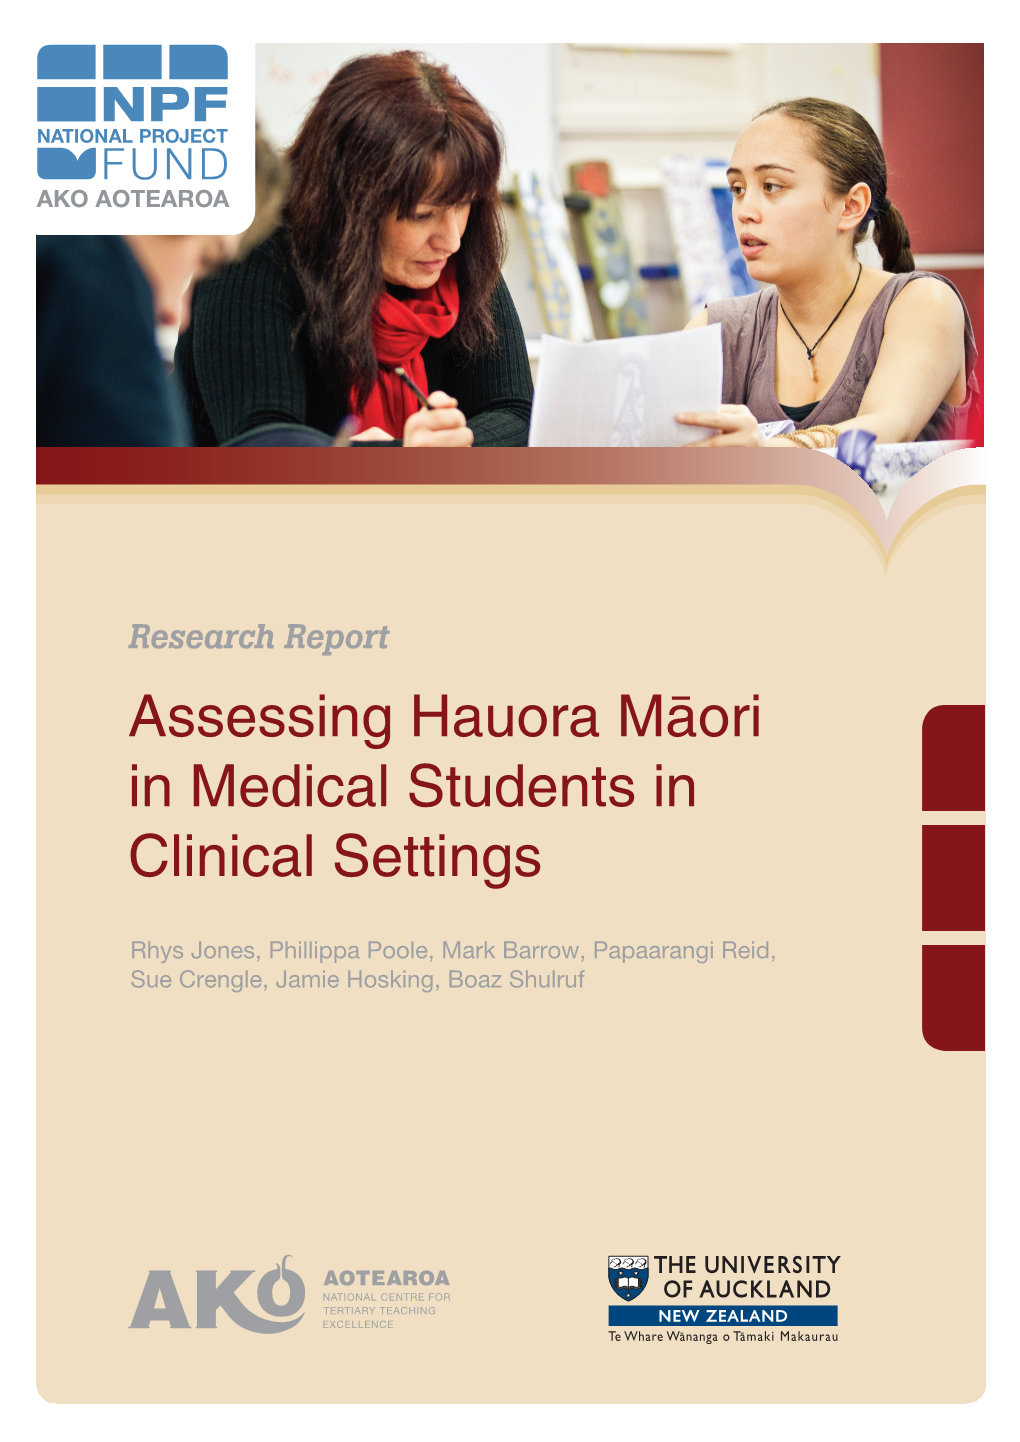 Assessing Hauora Māori in Medical Students in Clinical Settings